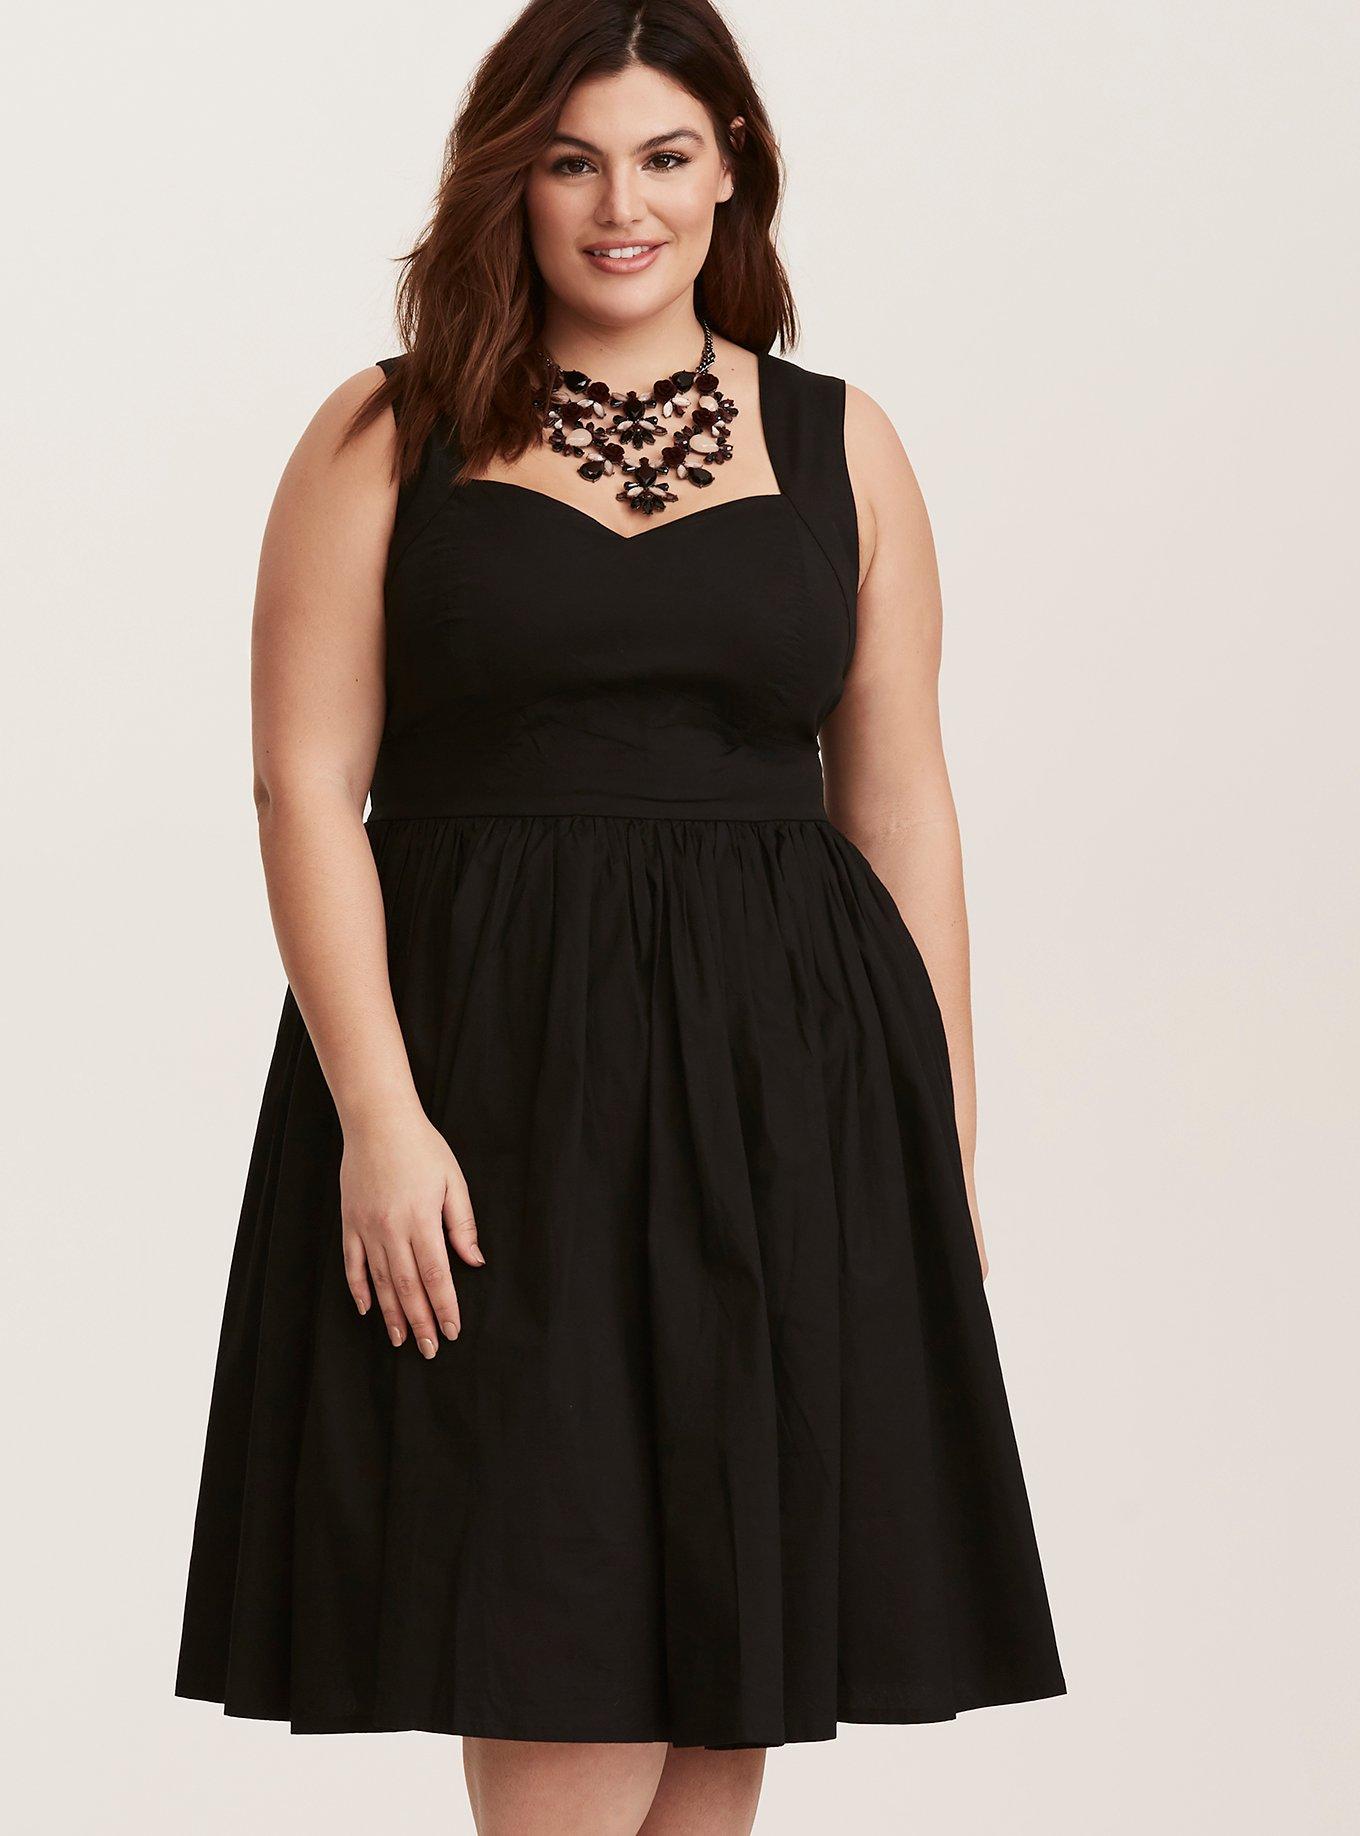 Torrid Plus Size Women's Clothing for sale in Brookside, Ohio